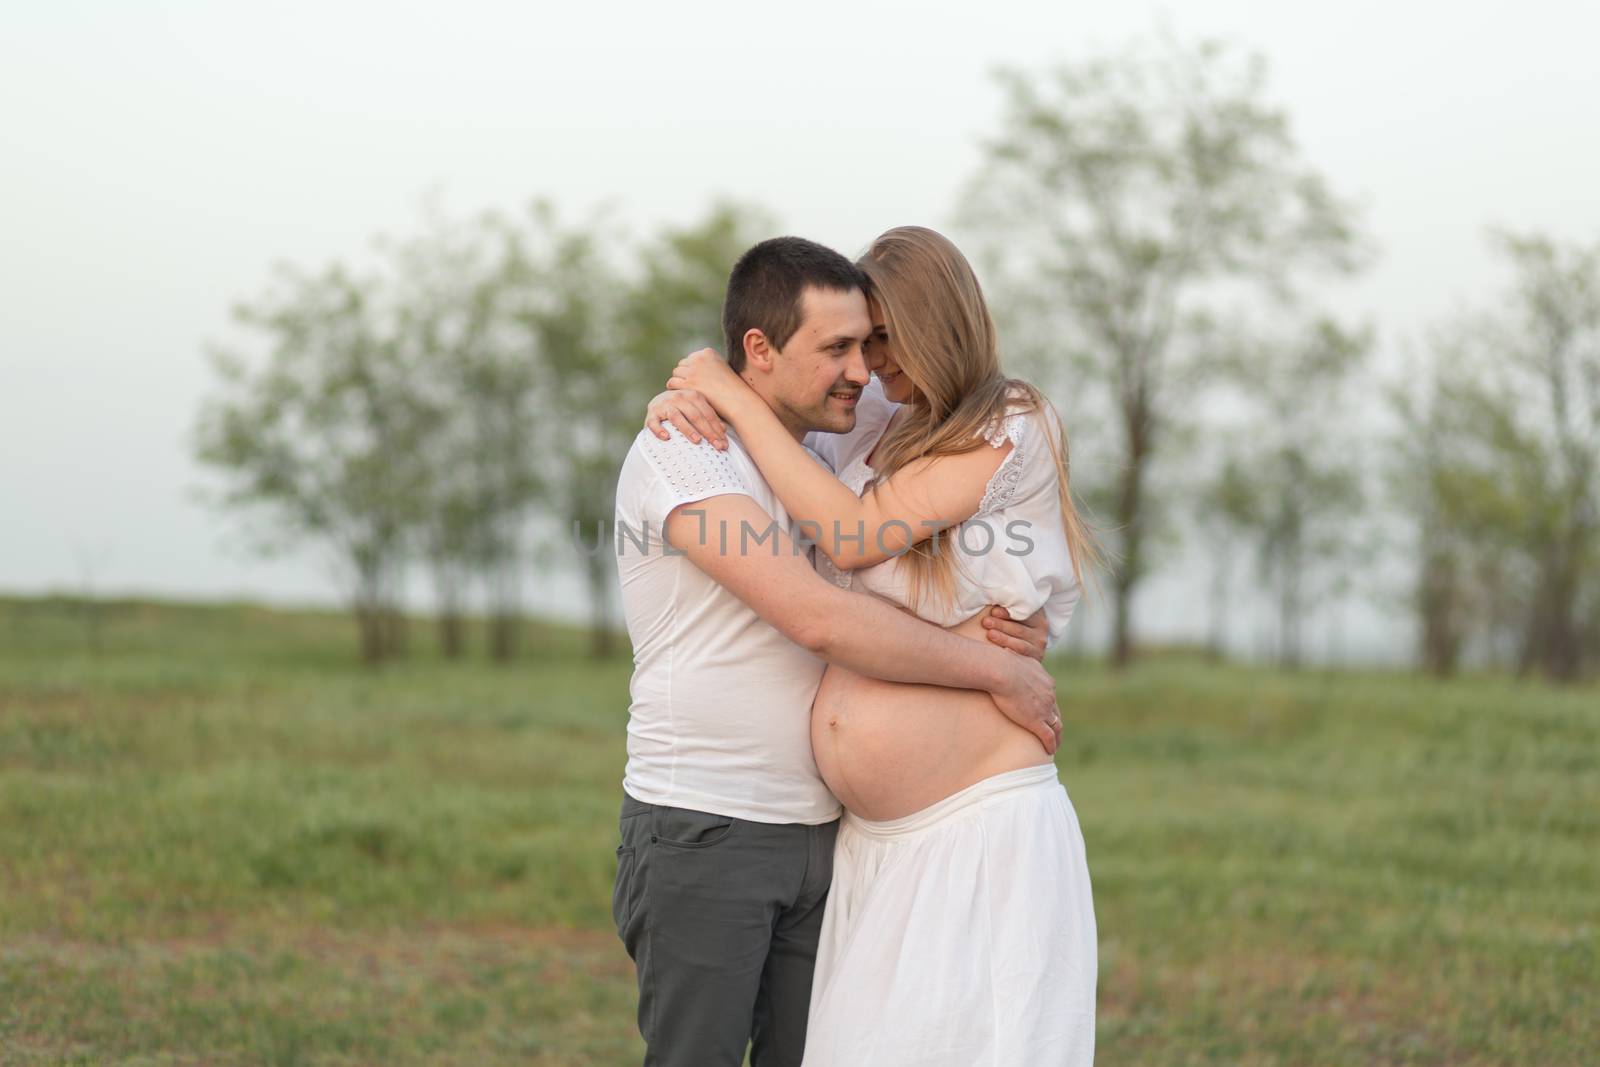 Happy moments of pregnancy. A loving husband with his pregnant wife in the fresh air away from the city.